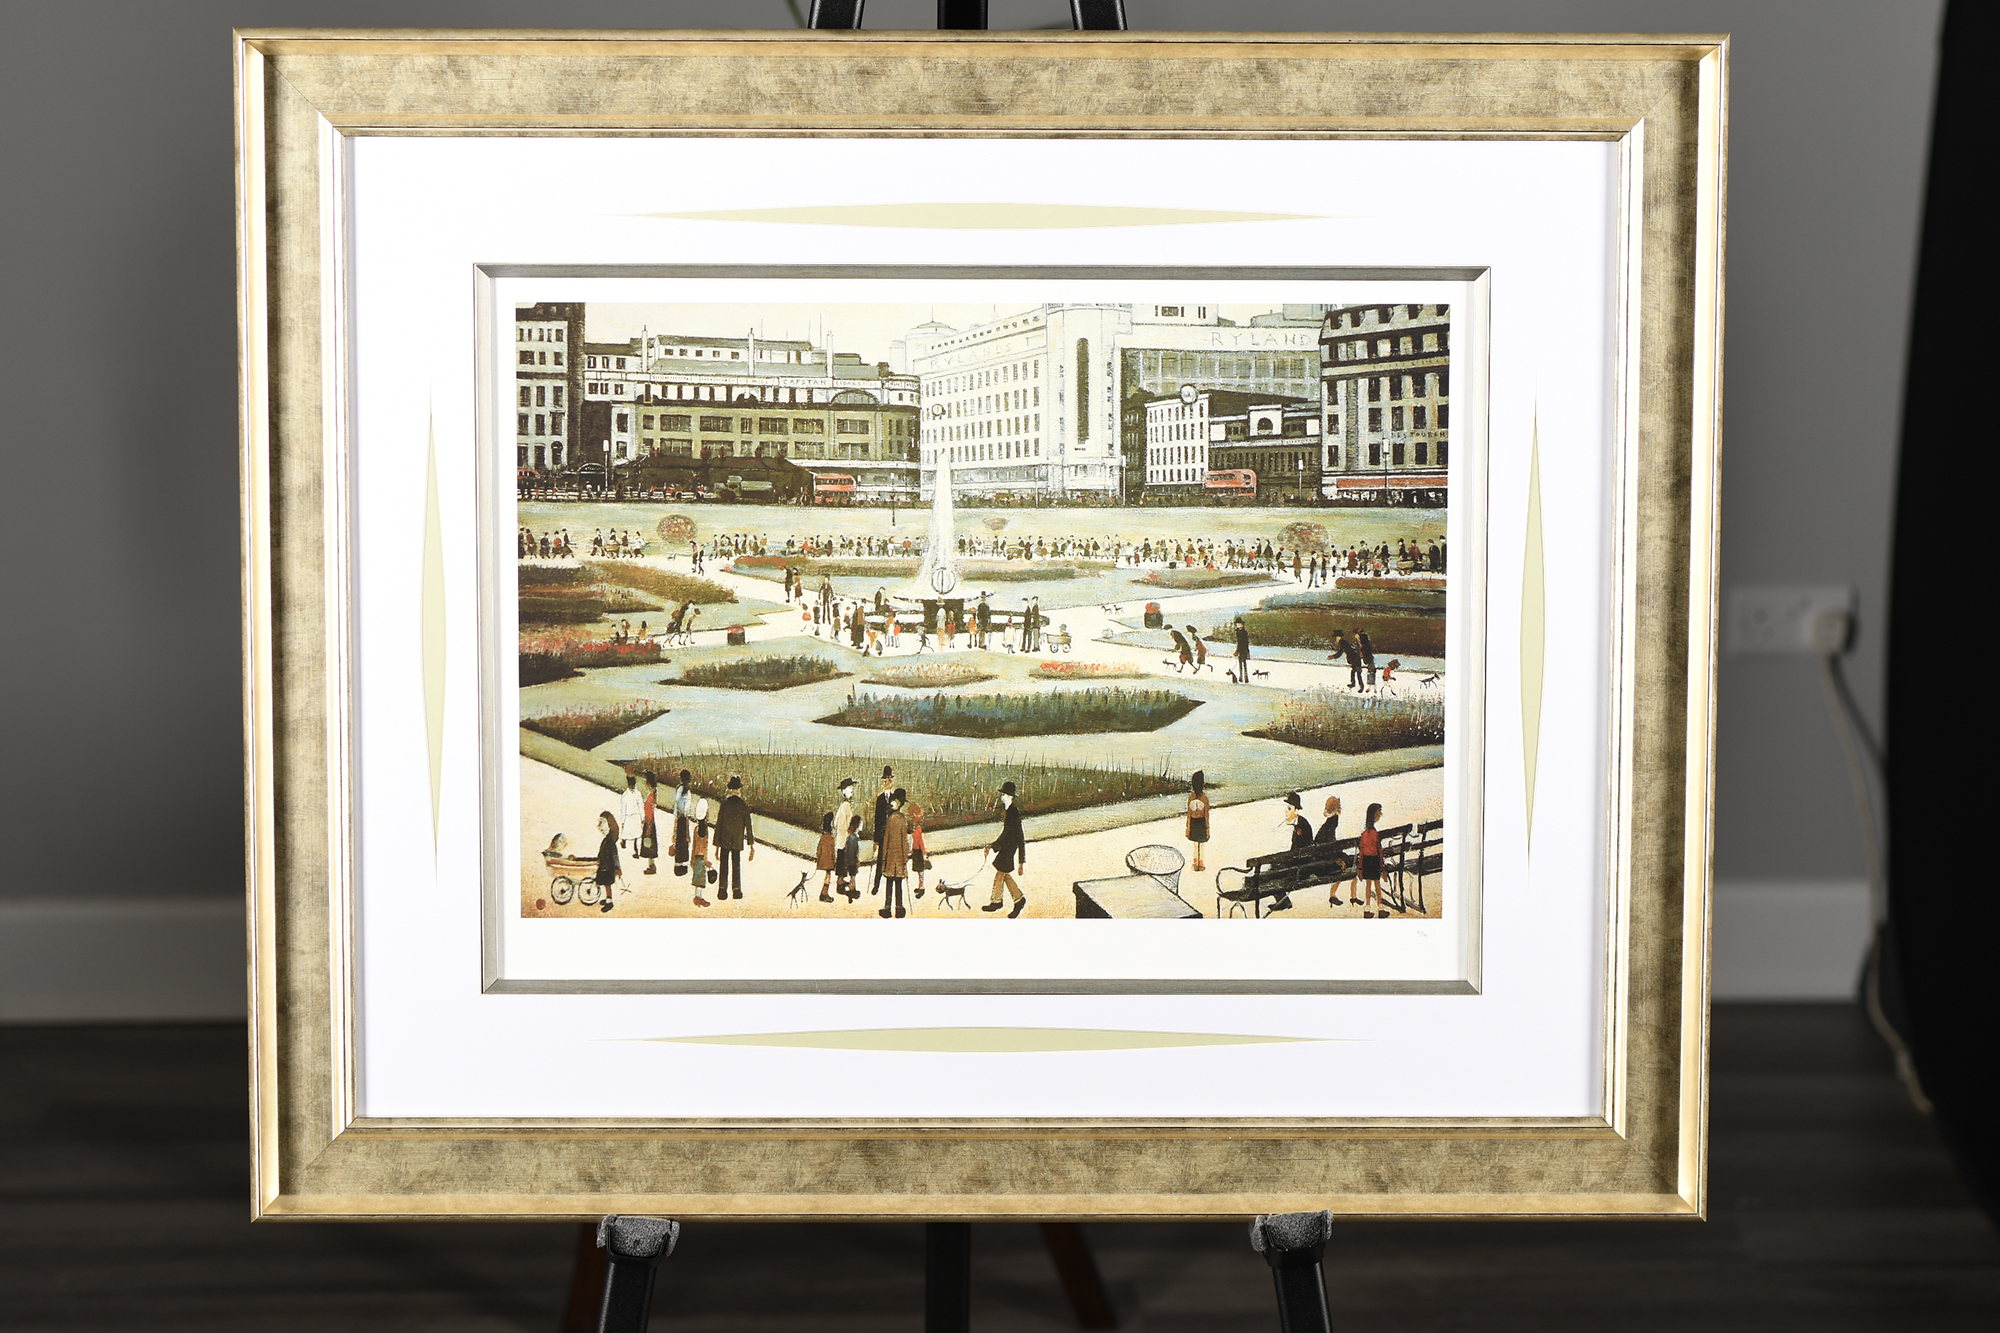 Limited Edition L.S. Lowry "Piccadilly Gardens" Authentication & Embossed Stamped. Mint Condition.